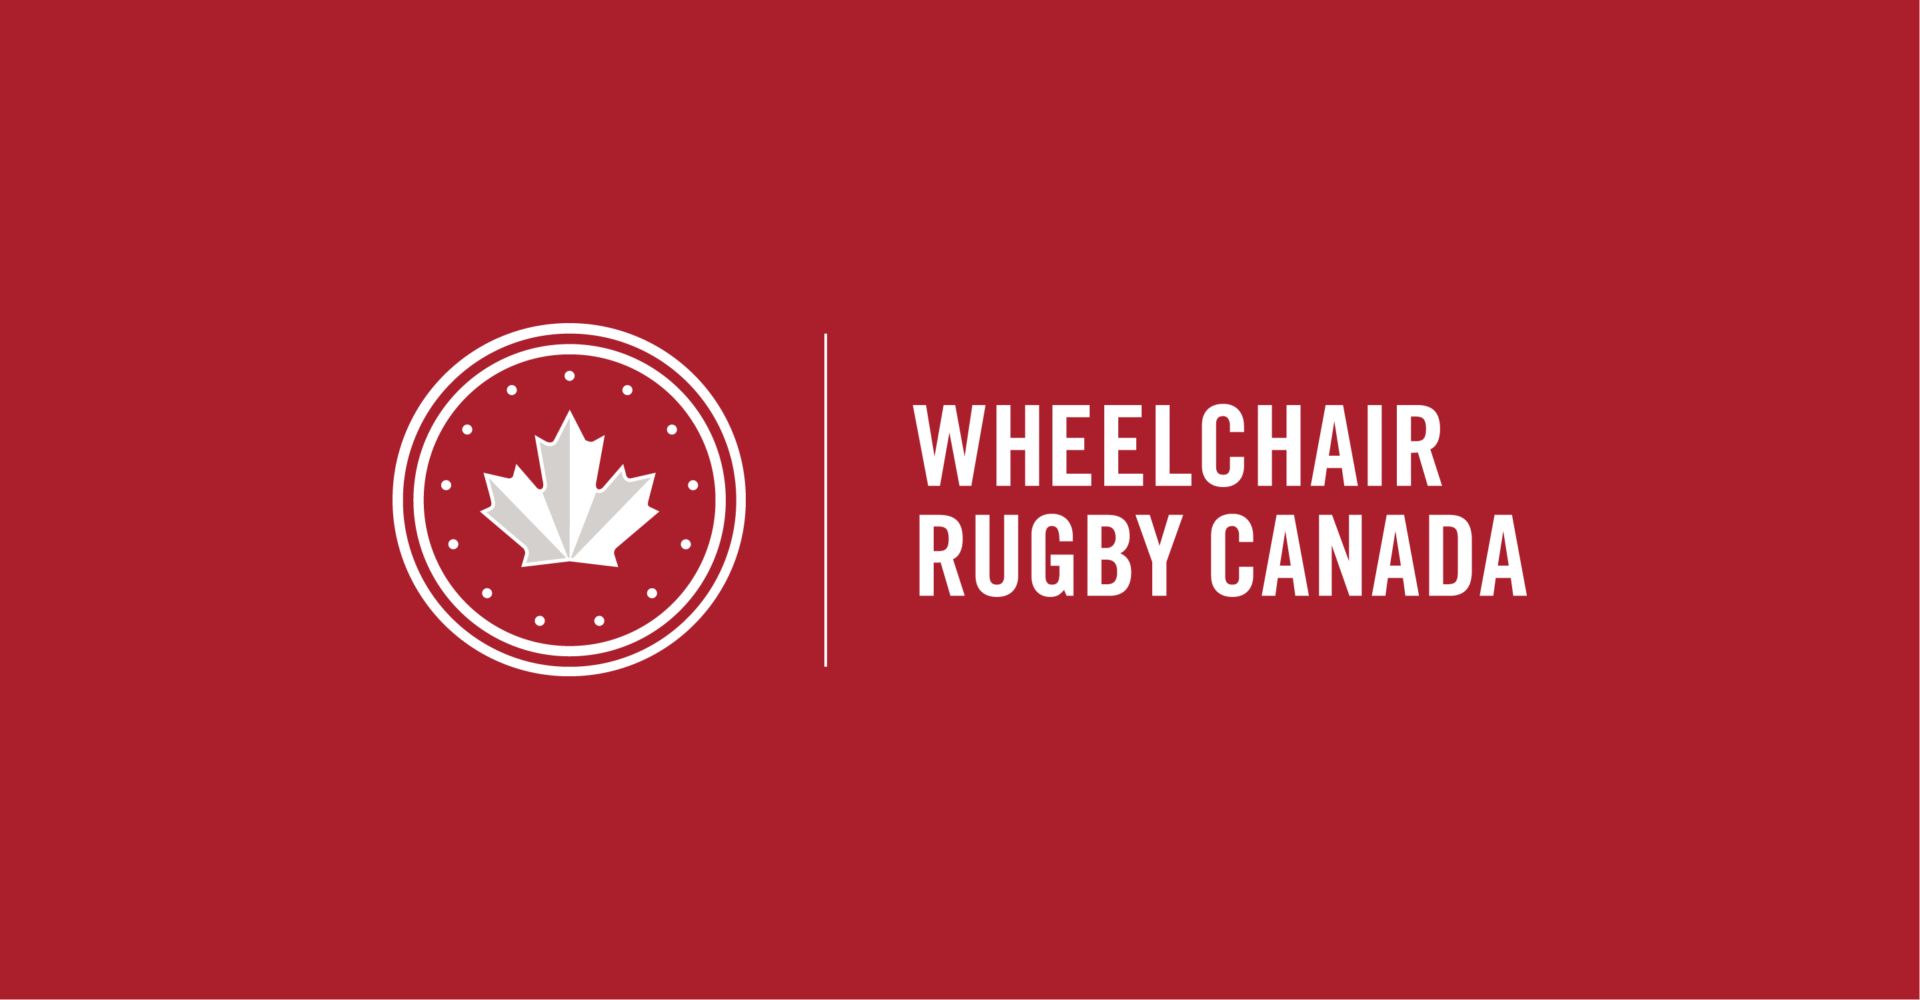 Canadian Wheelchair Sports Association to Rebrand As Wheelchair Rugby Canada